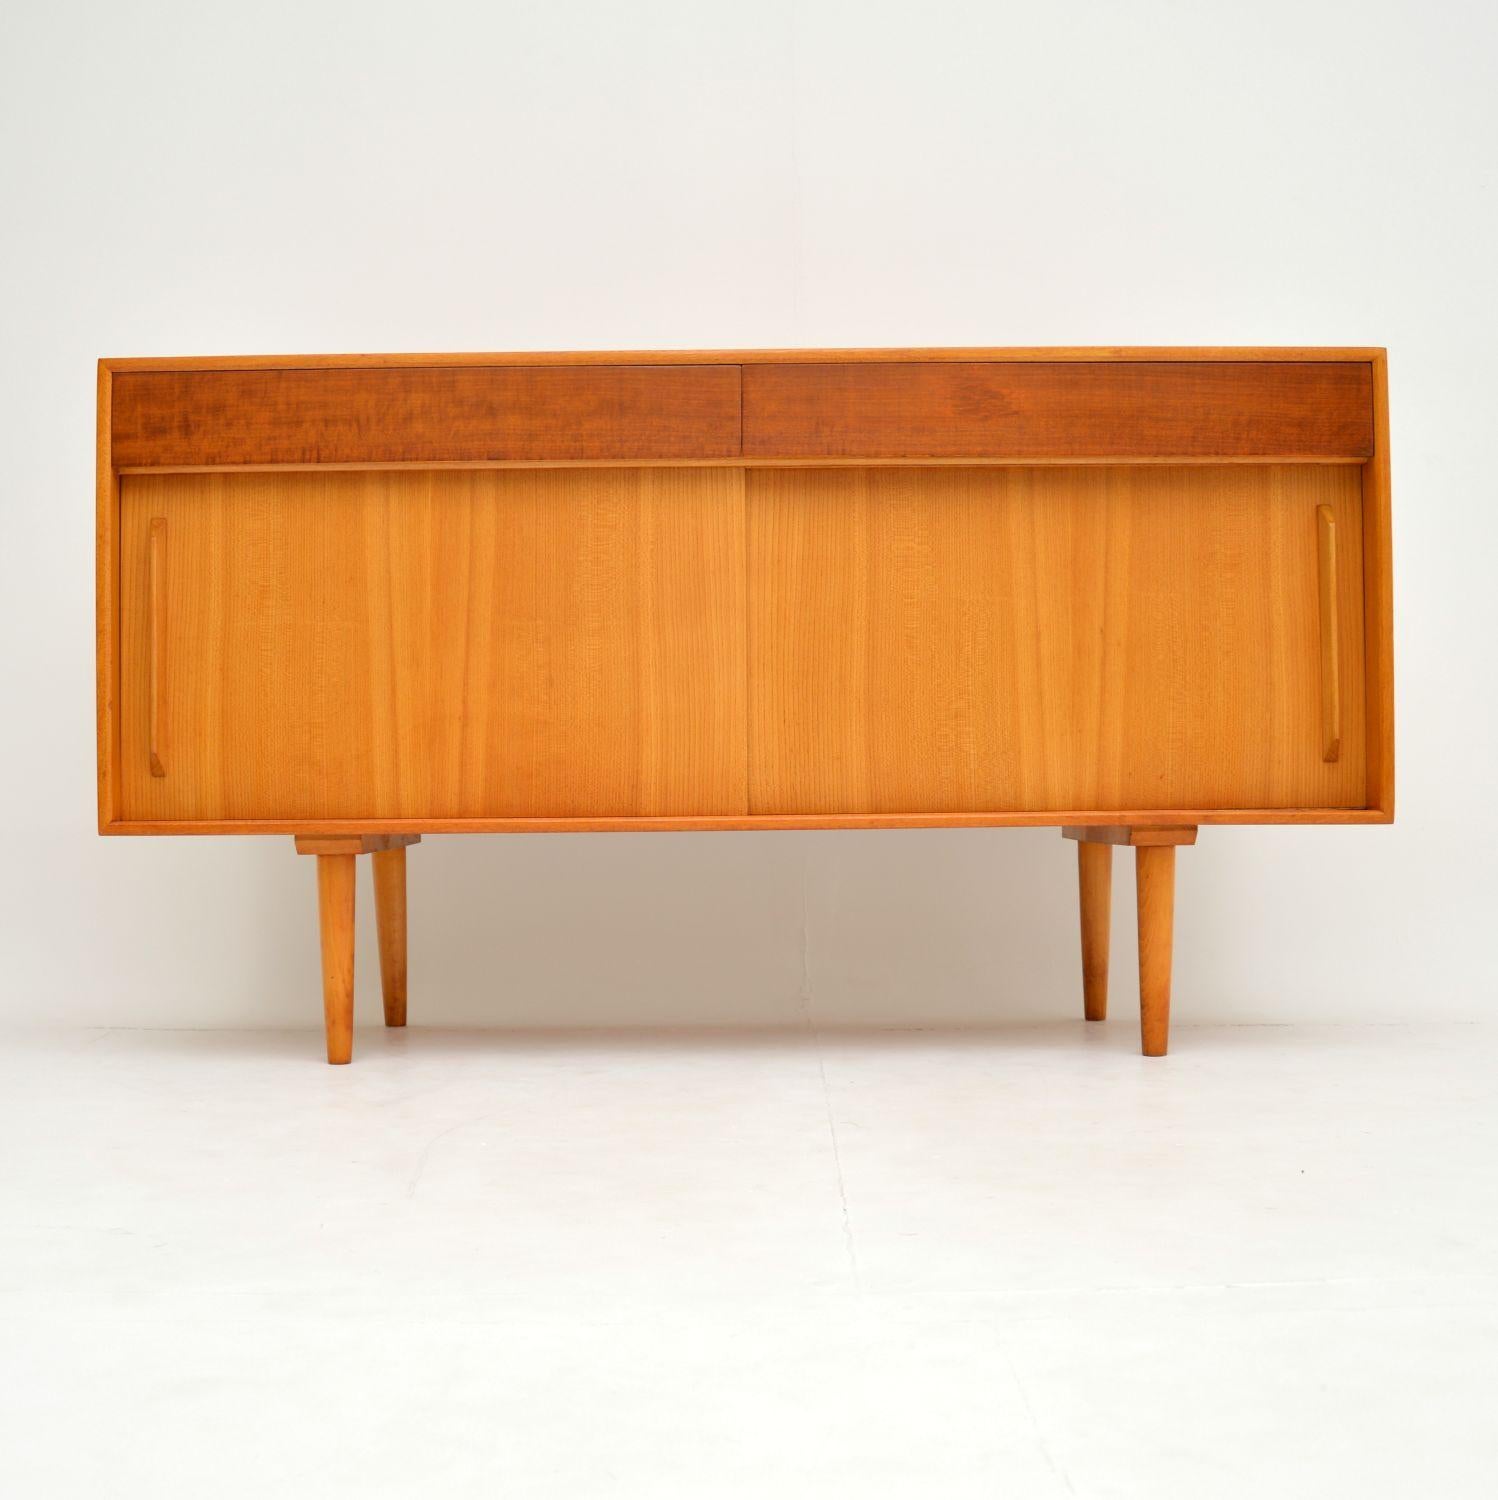 A stylish and iconic design, this is the Hilleplan sideboard, designed by Robin Day in 1952. This example dates from the year 1952, it must have been among one of the very first made. It has an early Hille badge in the top drawer, and there is a